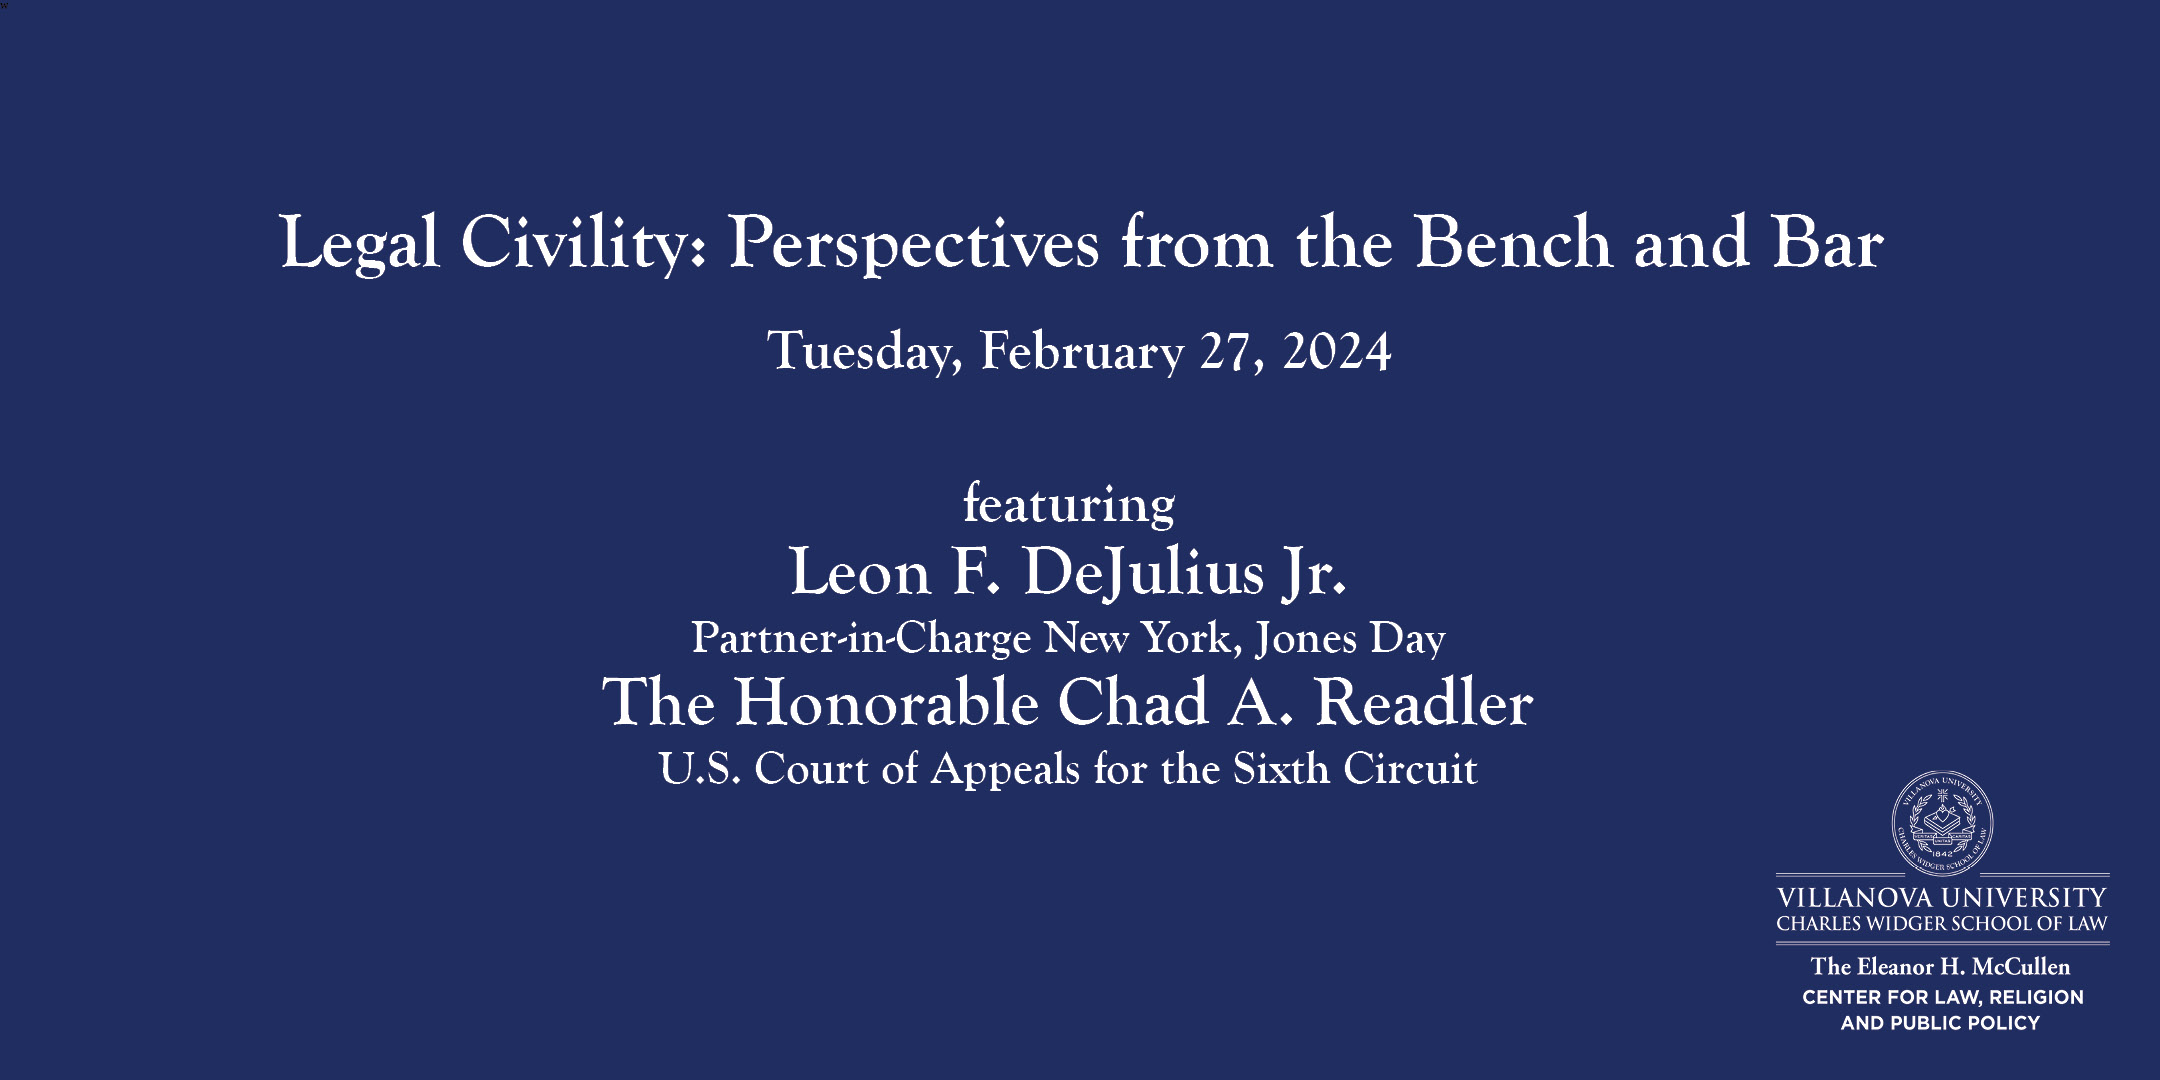 Legal Civility: Perspectives from the Bench and Bar, 02/27